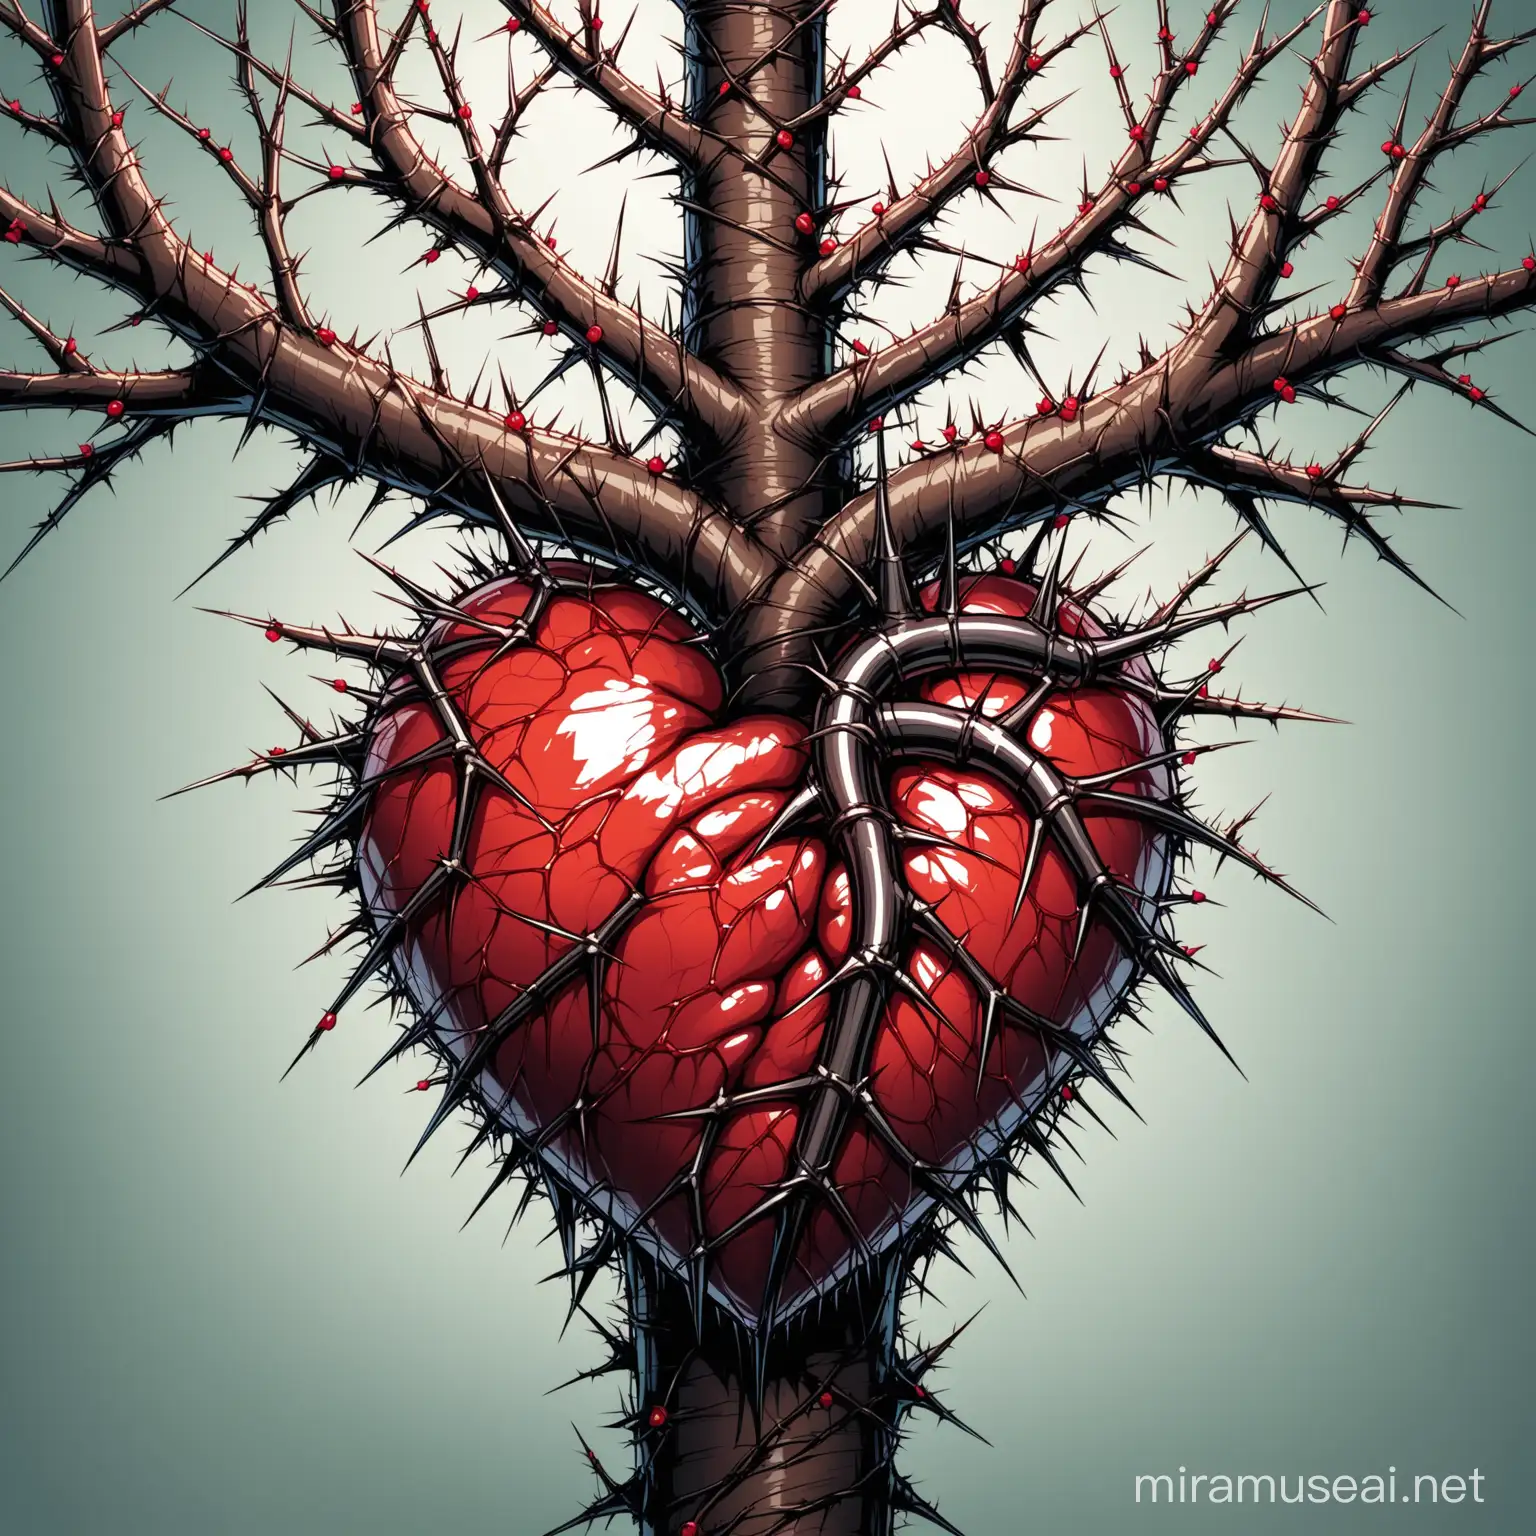 generate a human heart, with thorns coming out of it, hanging on a tree branch
